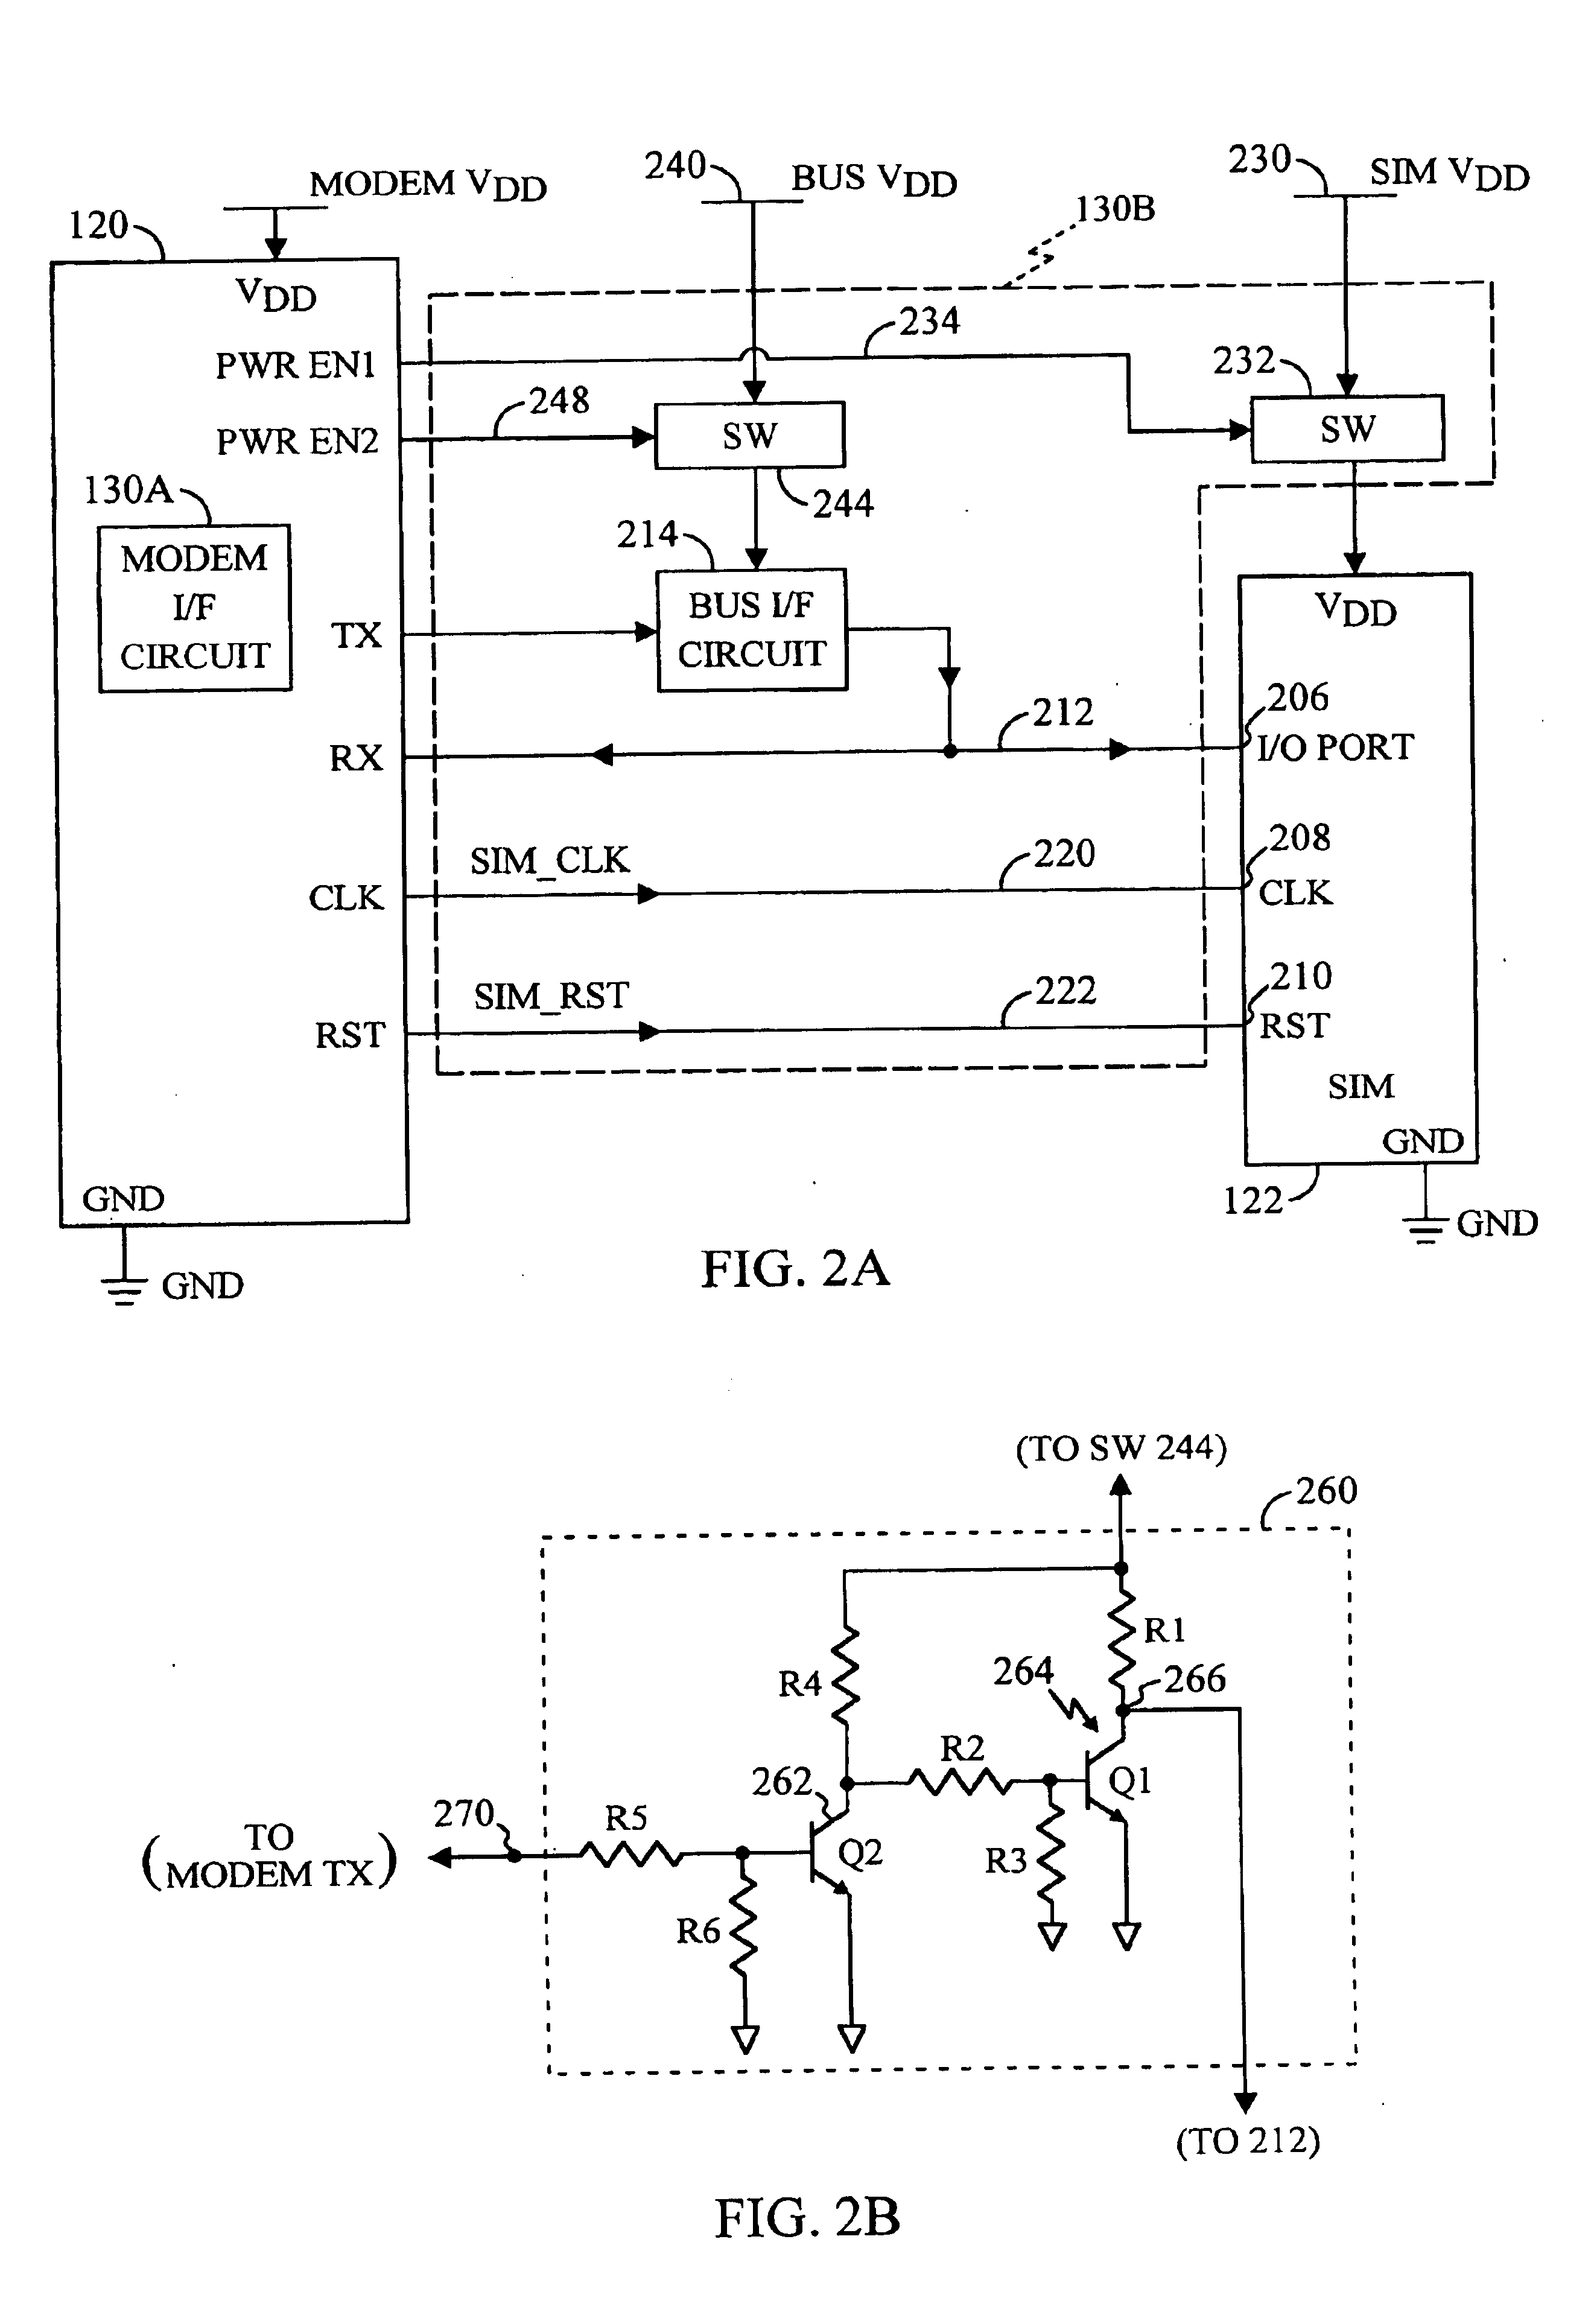 Method and circuit for interfacing a modem in a wireless communication device to a subscriber interface module